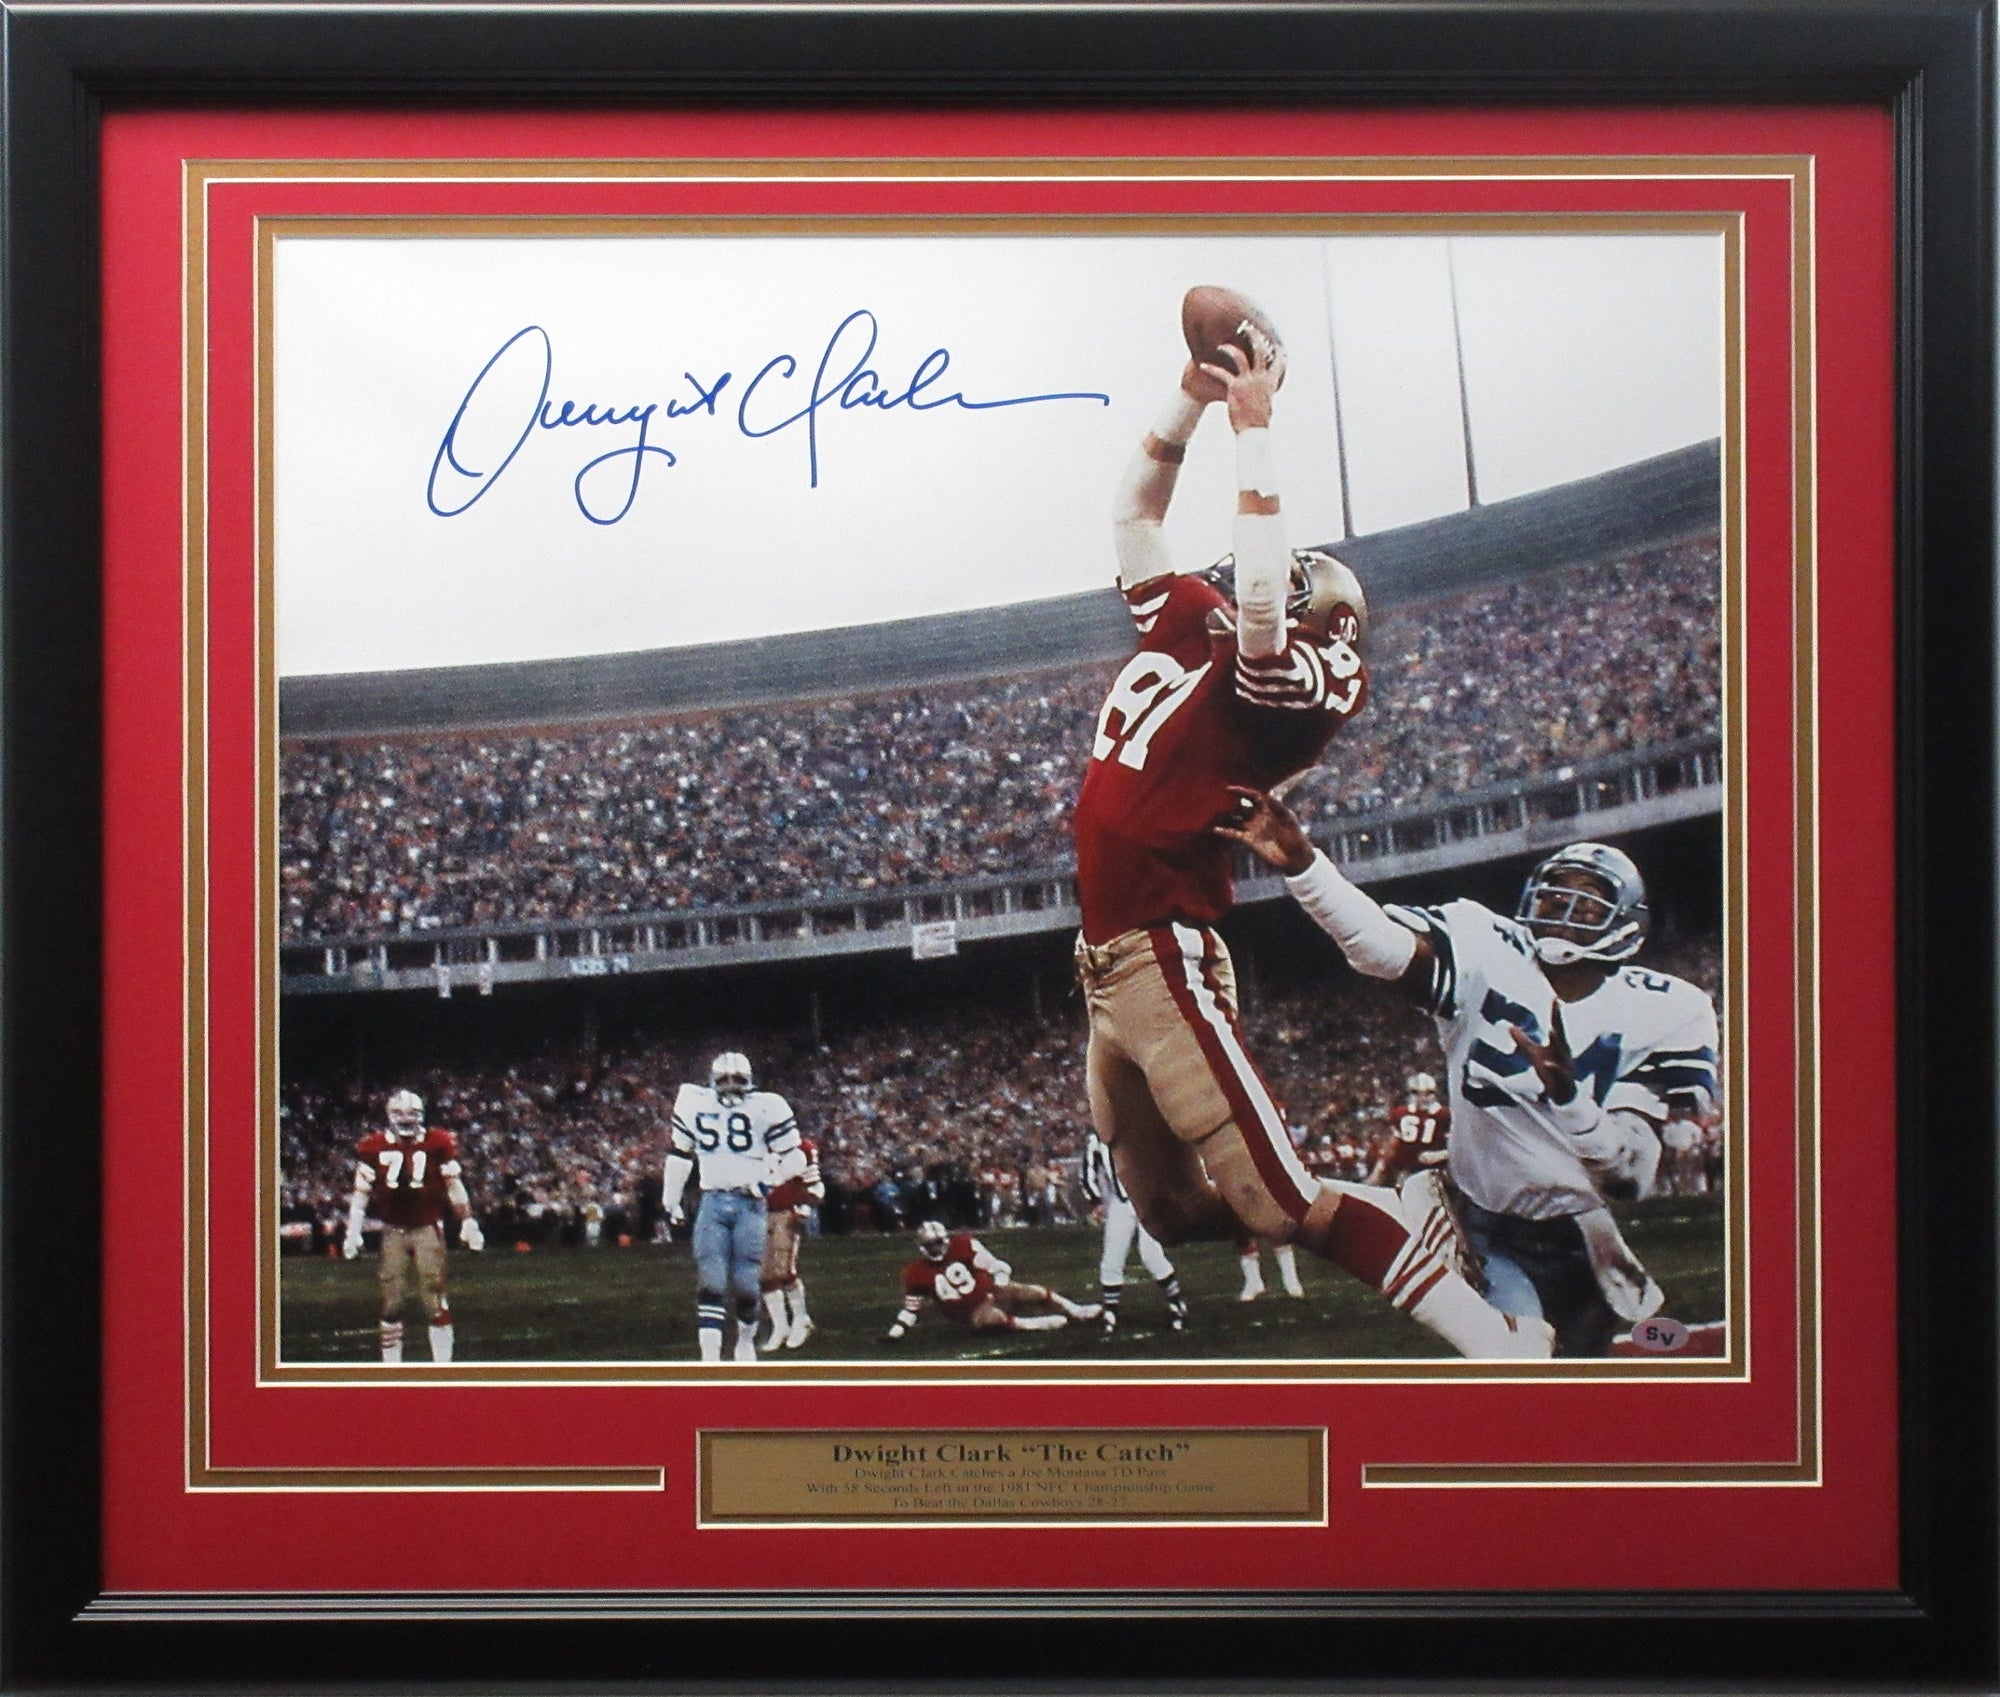 Dwight Clark Autographed 16x20 San Francisco 49ers "The Catch" Photo Framed